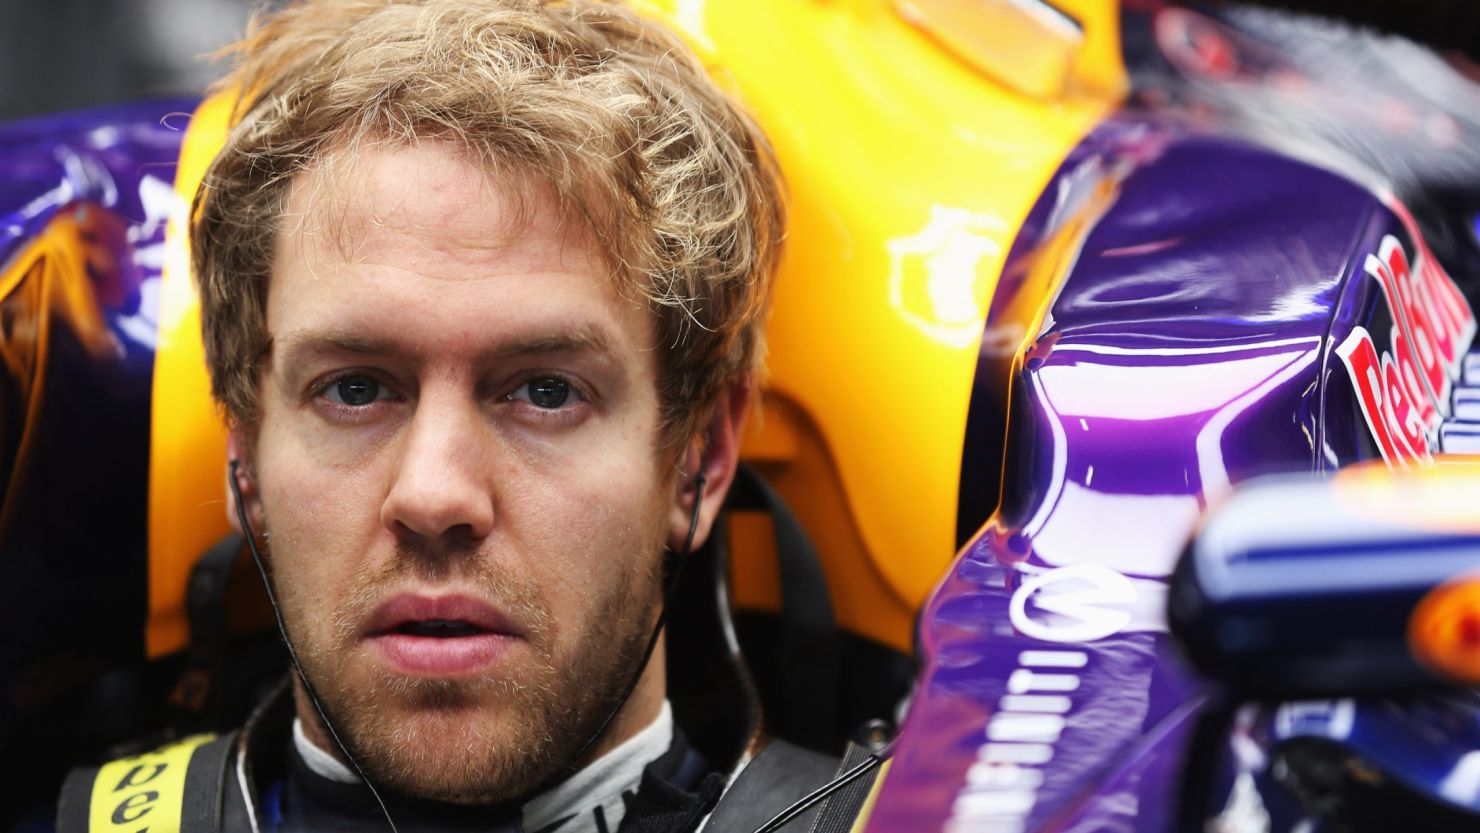 Tense times for Red Bull's world champion Sebastian Vettel as his winter testing is cut short by his car's engine problems.